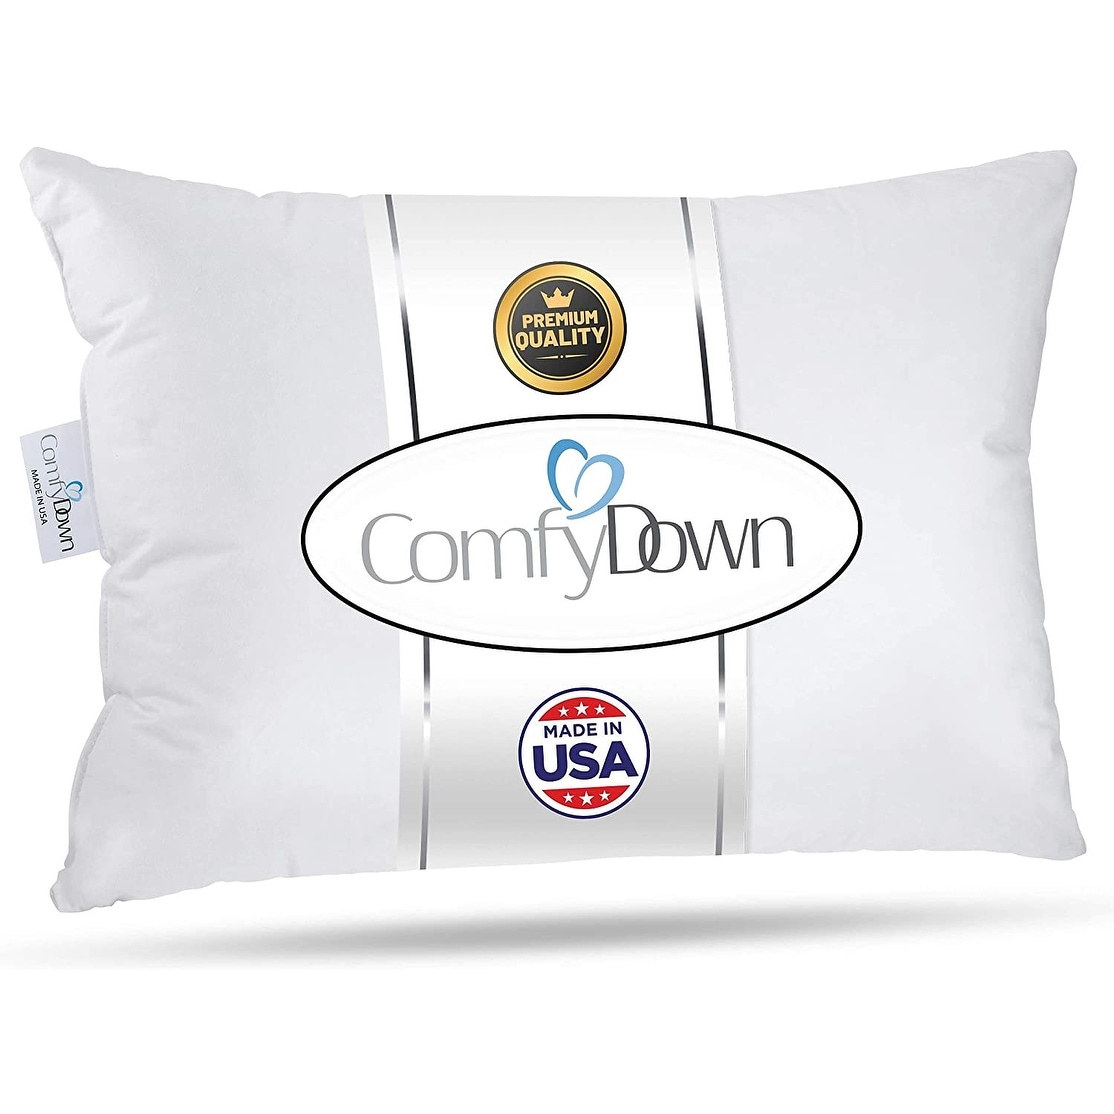 https://ak1.ostkcdn.com/images/products/is/images/direct/65be4d96b67c885202d437616a52dc50259e648a/ComfyDown-Travel-Pillow---Filled-with-800-FP-Goose-Down%2C-300-TC-Cover.jpg